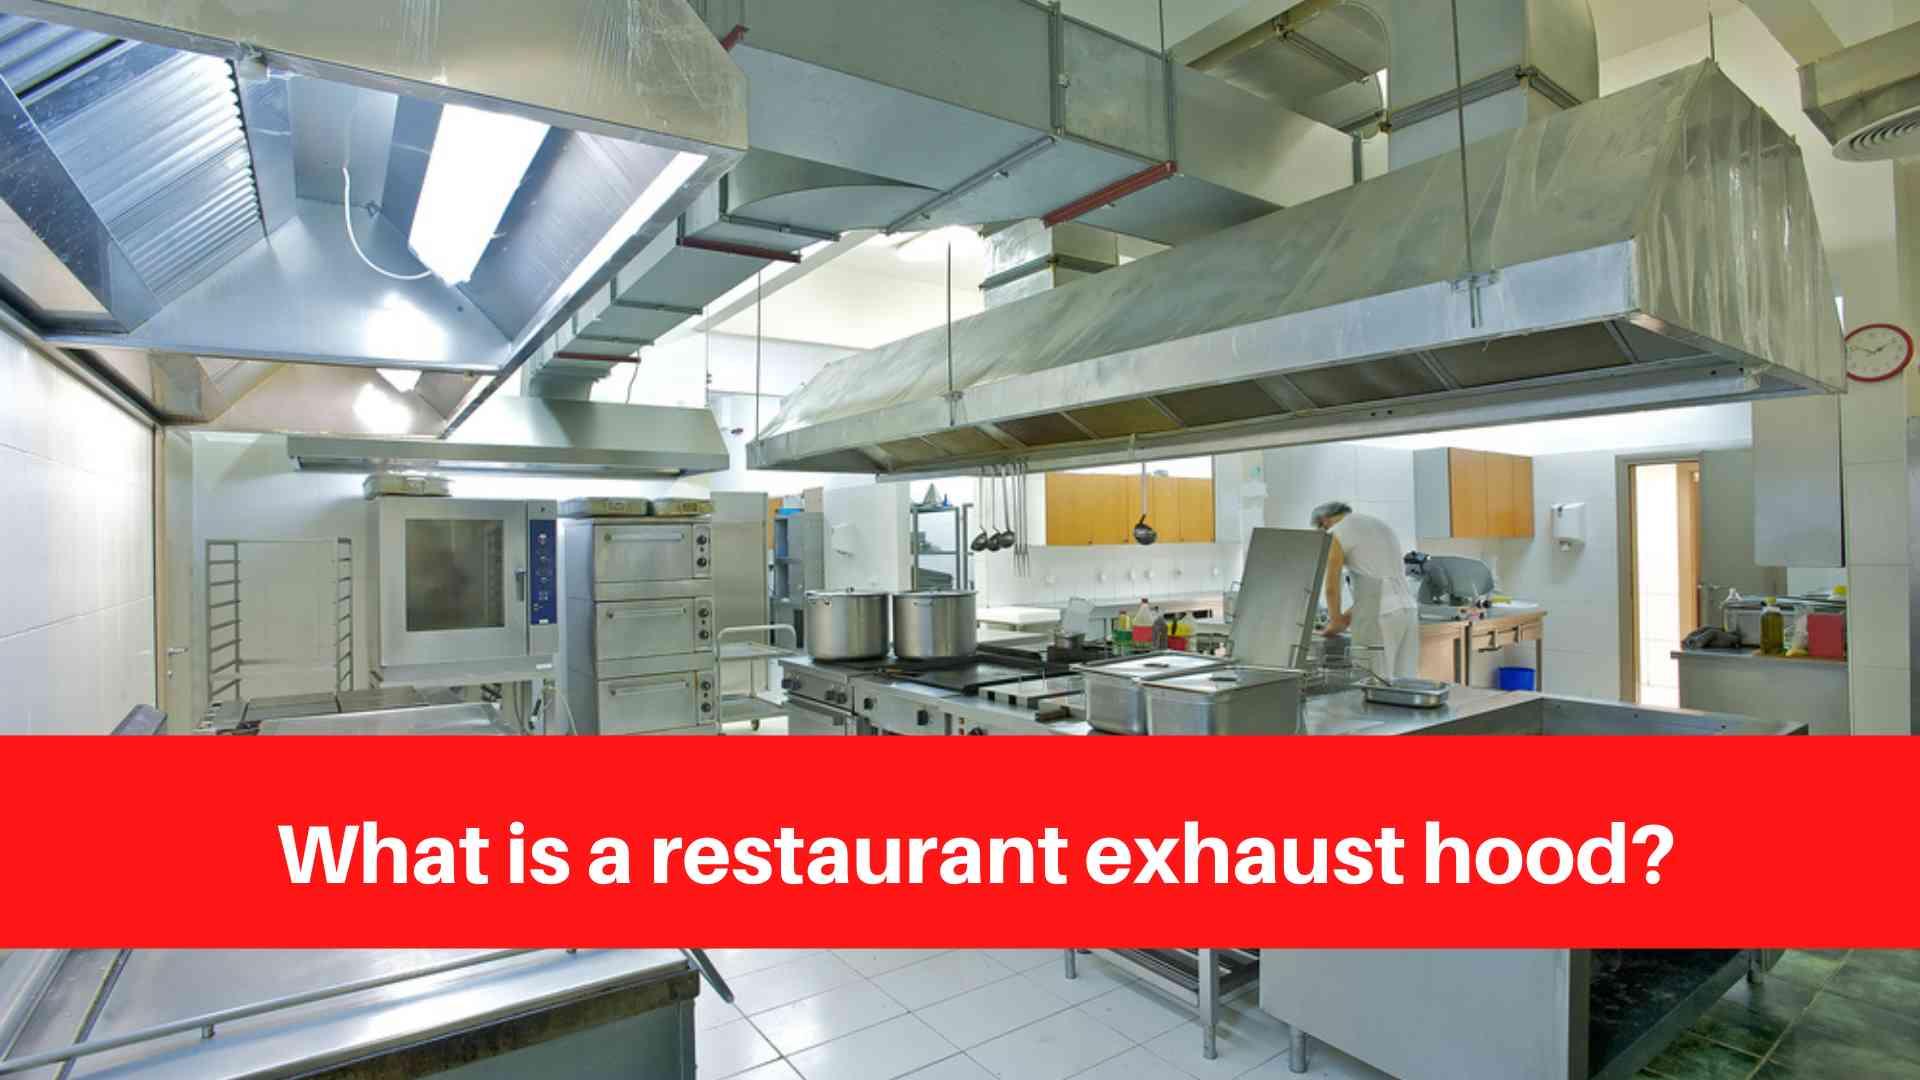 What is a restaurant exhaust hood